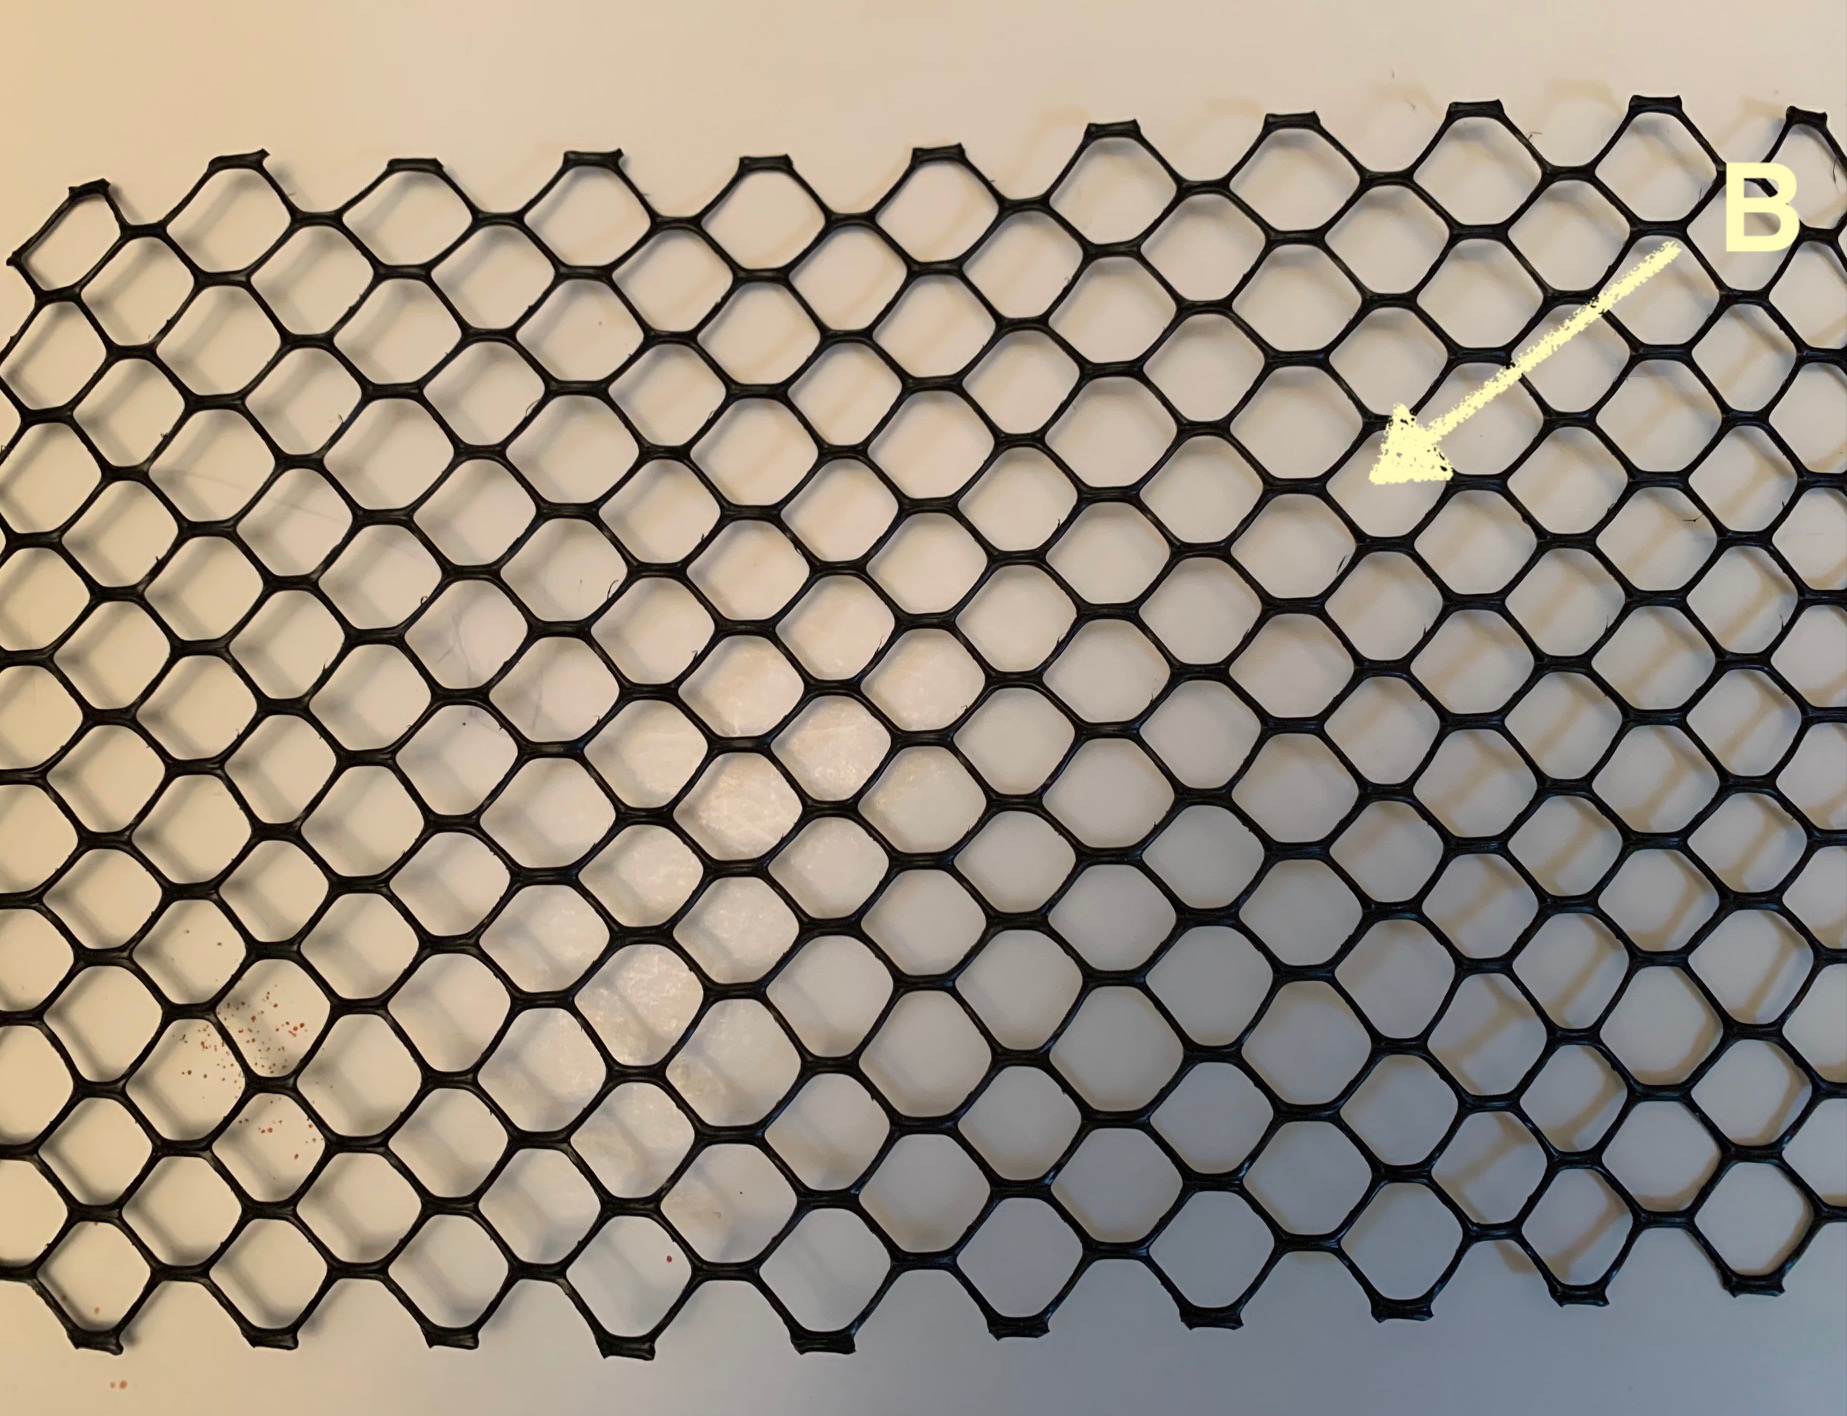 Using the "graphene" sheet if we wrap the sheet starting at B in the direction of the arrow (right; clockwise) we will produce a chiral wrap at left.